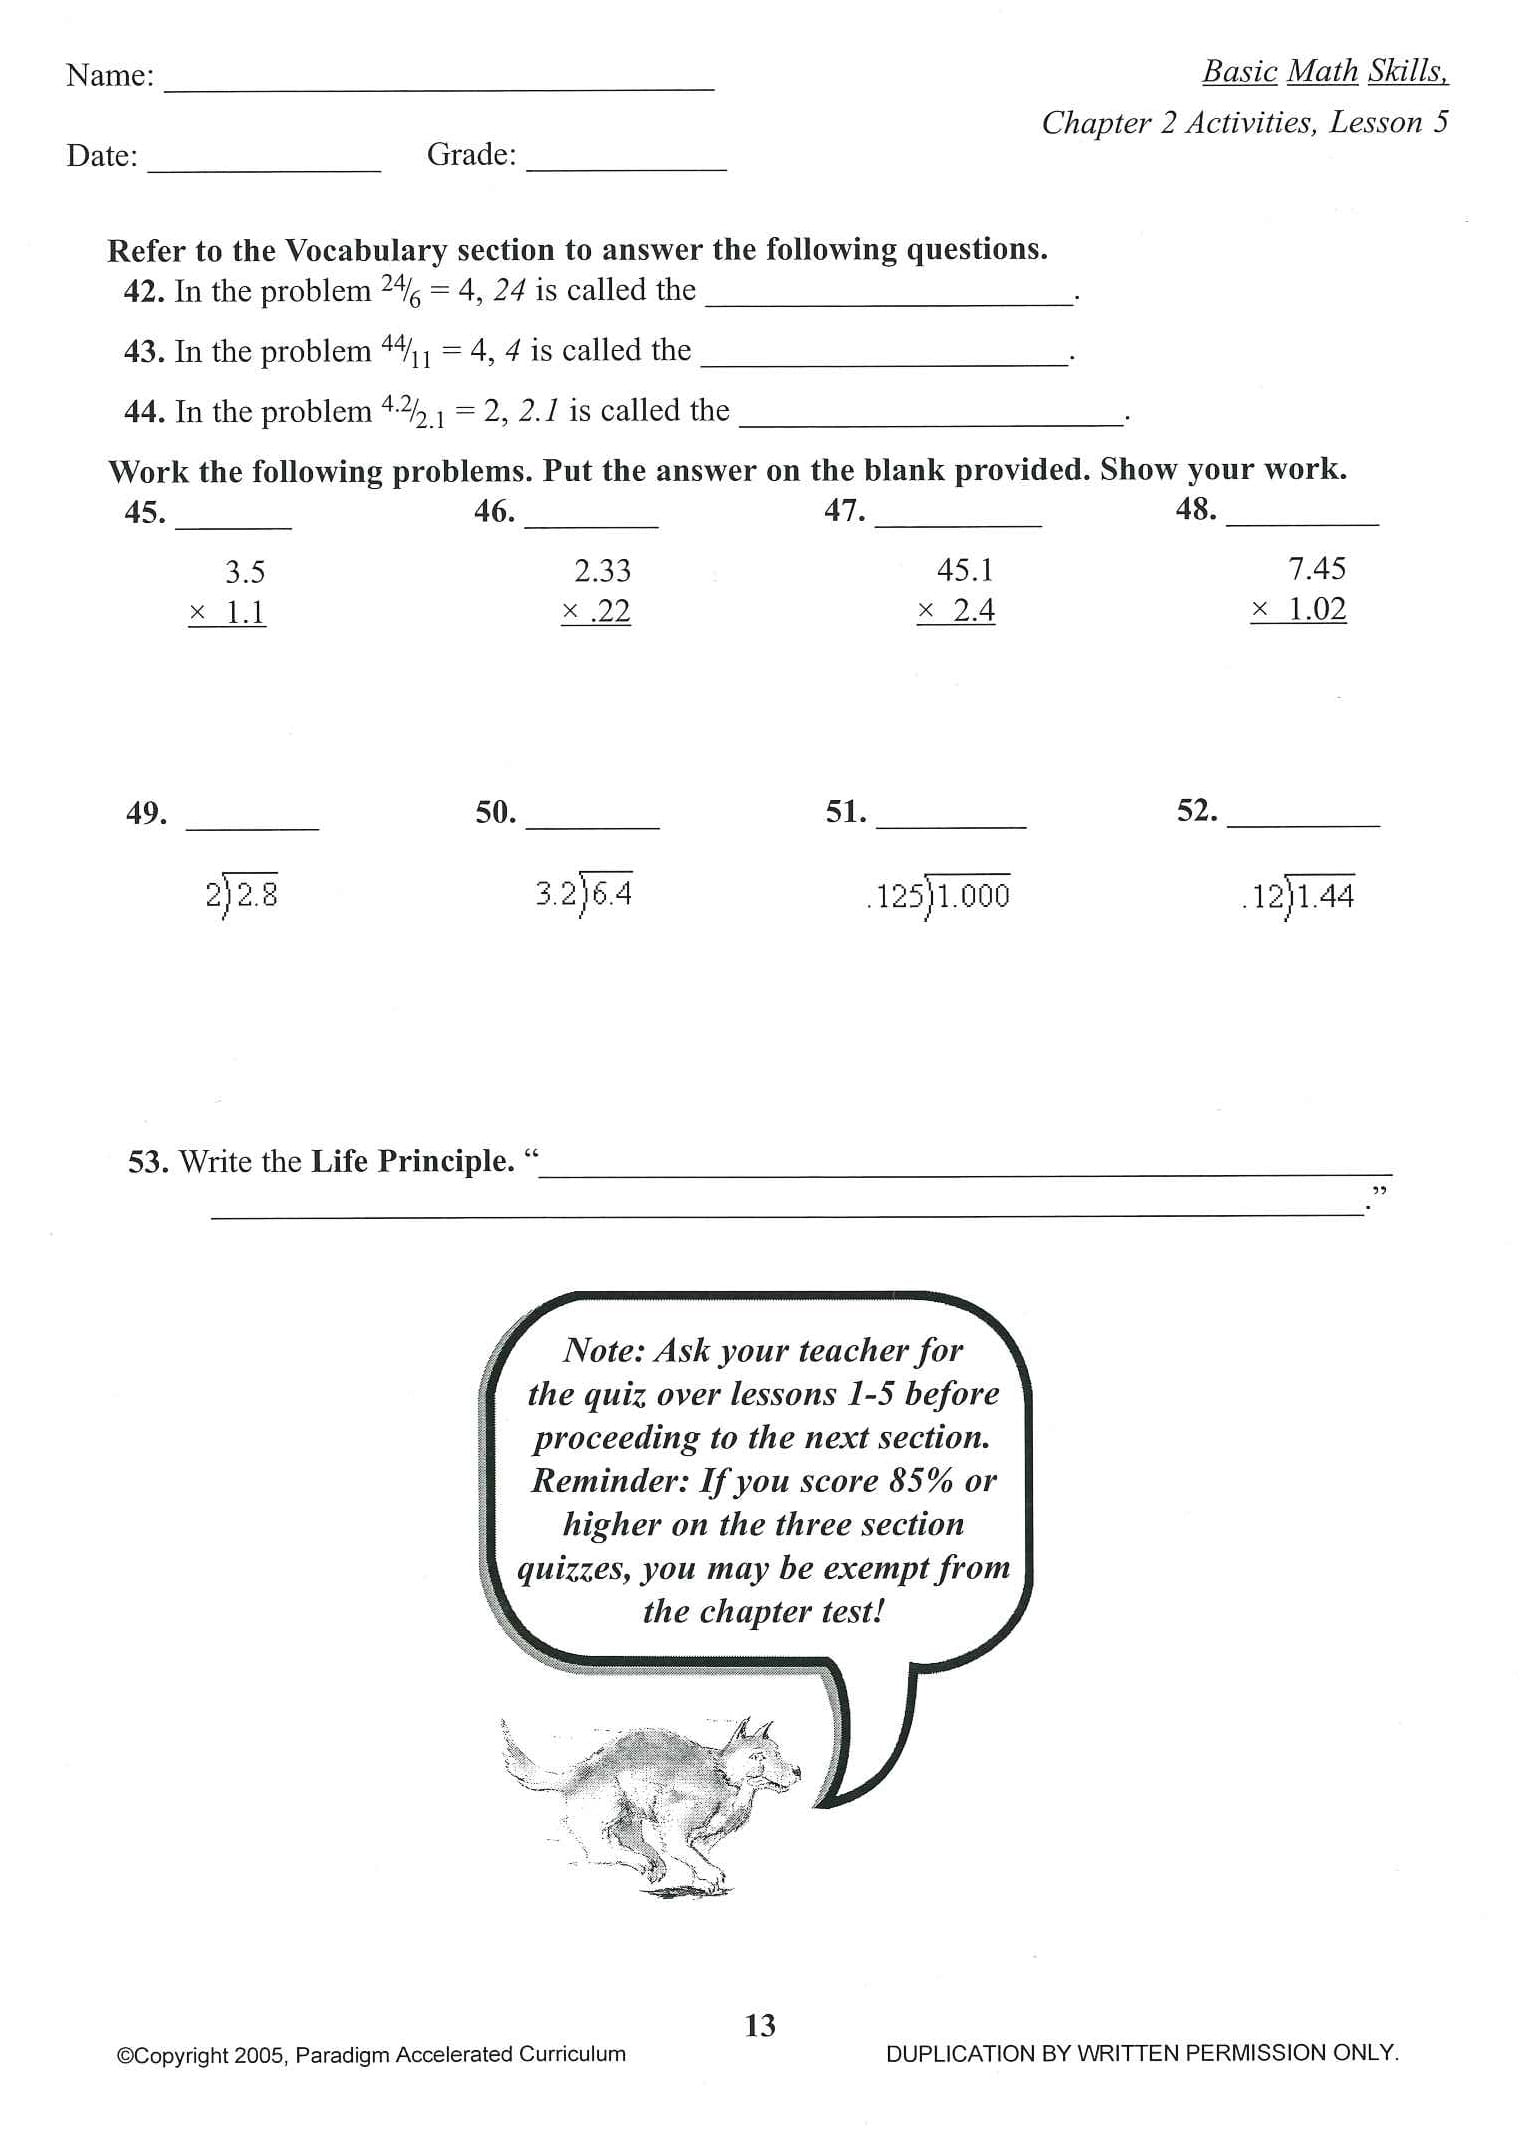 Basic Math Skills Chapter 2 Activities! Save Now!